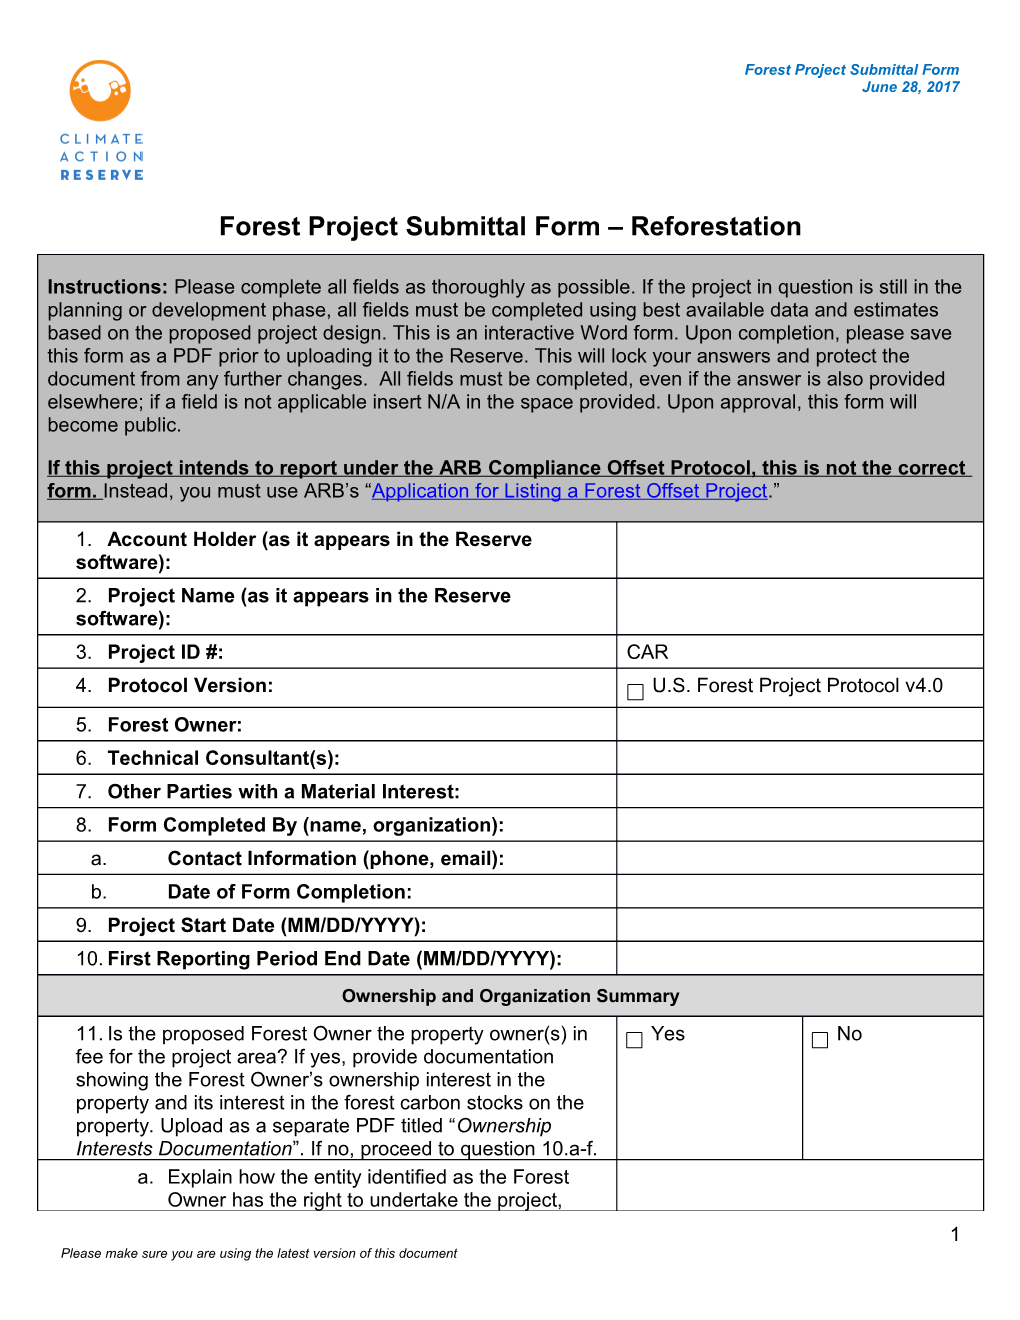 Forest Project Submittal Form Reforestation